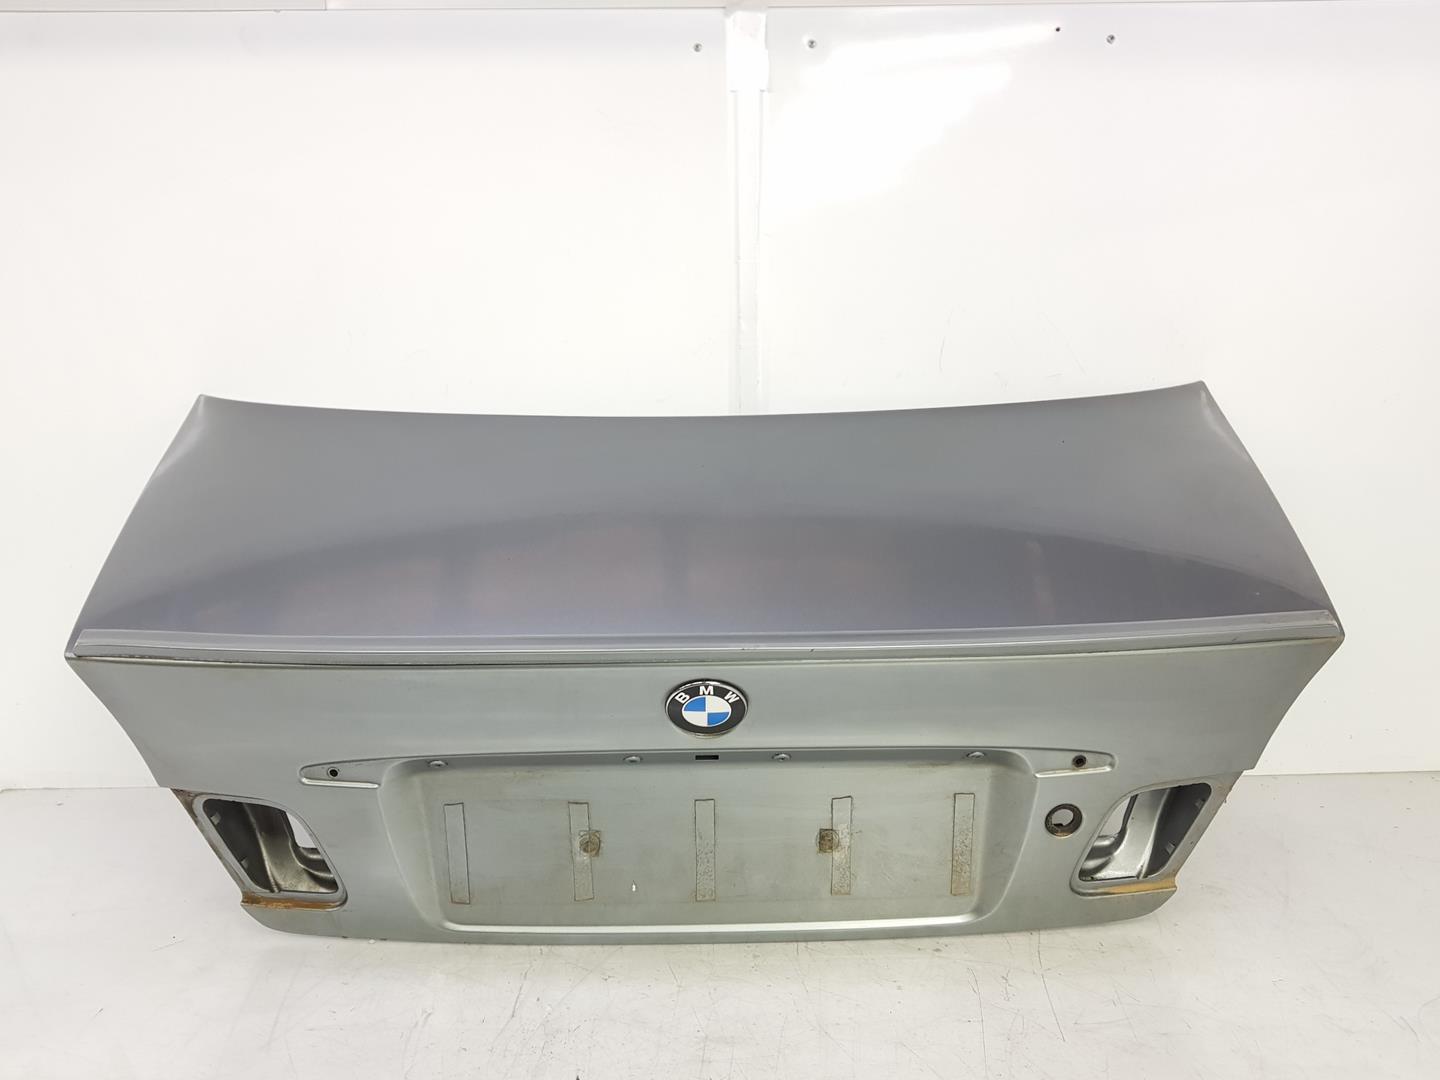 BMW 3 Series E46 (1997-2006) Bootlid Rear Boot 41627065260, 41627065260, GRTISA08 19786384